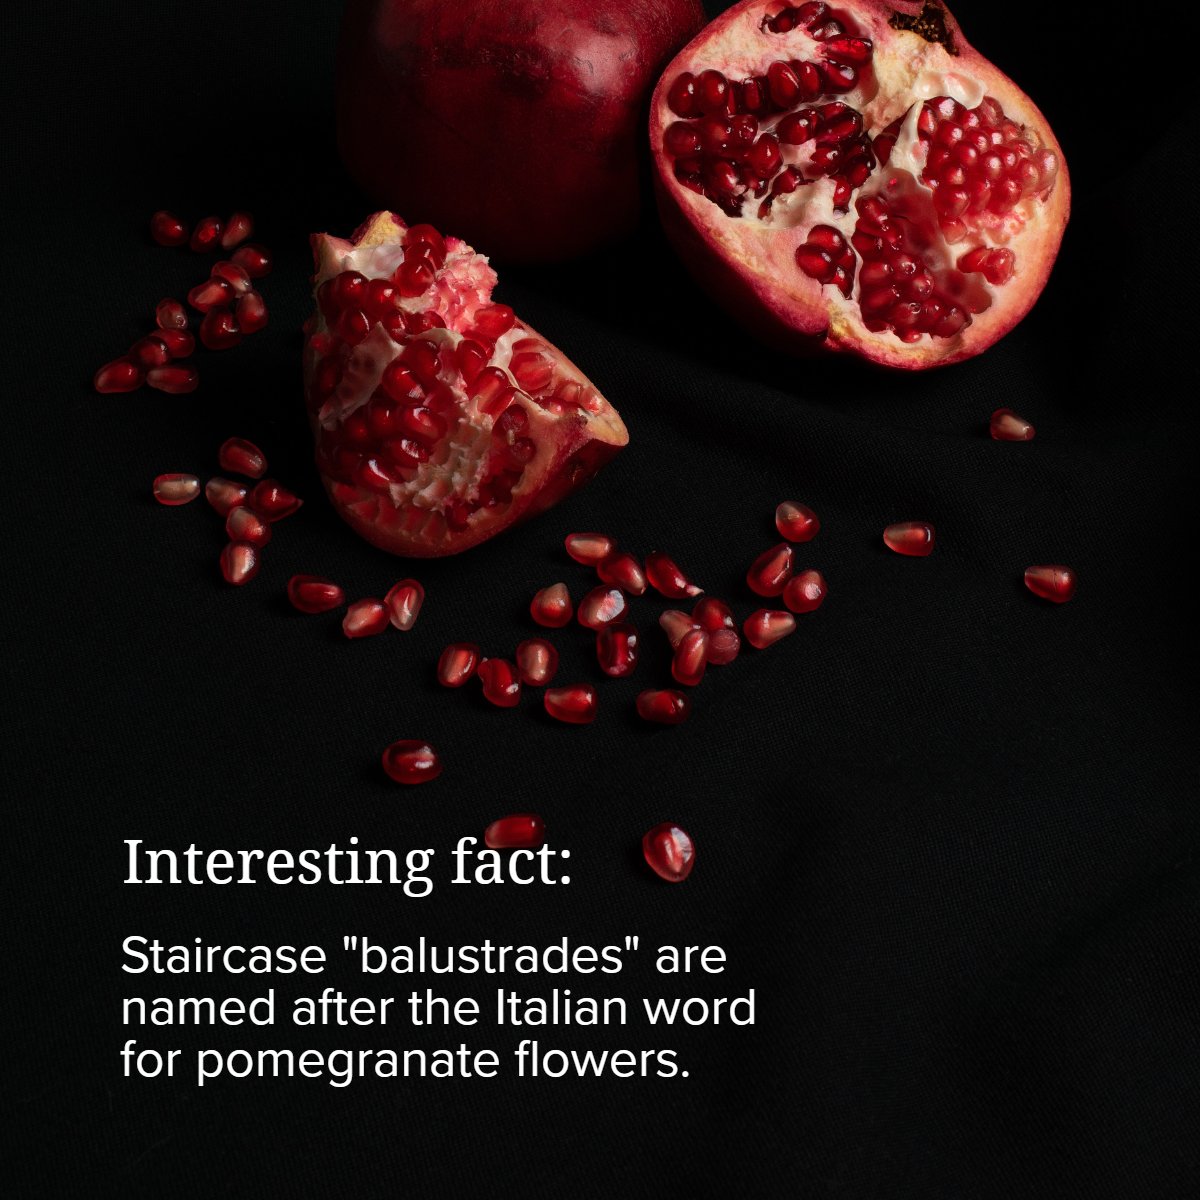 Did you know?

Staircase 'balustrades' are named after the Italian word for pomegranate flowers. 🤓

#didyouknow    #pomegranate    #staircase    #balustrades    #pomegranateflowers    #architecture    #facts
#Reno #RealEstate #Newhouse #Kitchenreno #FlooringReno